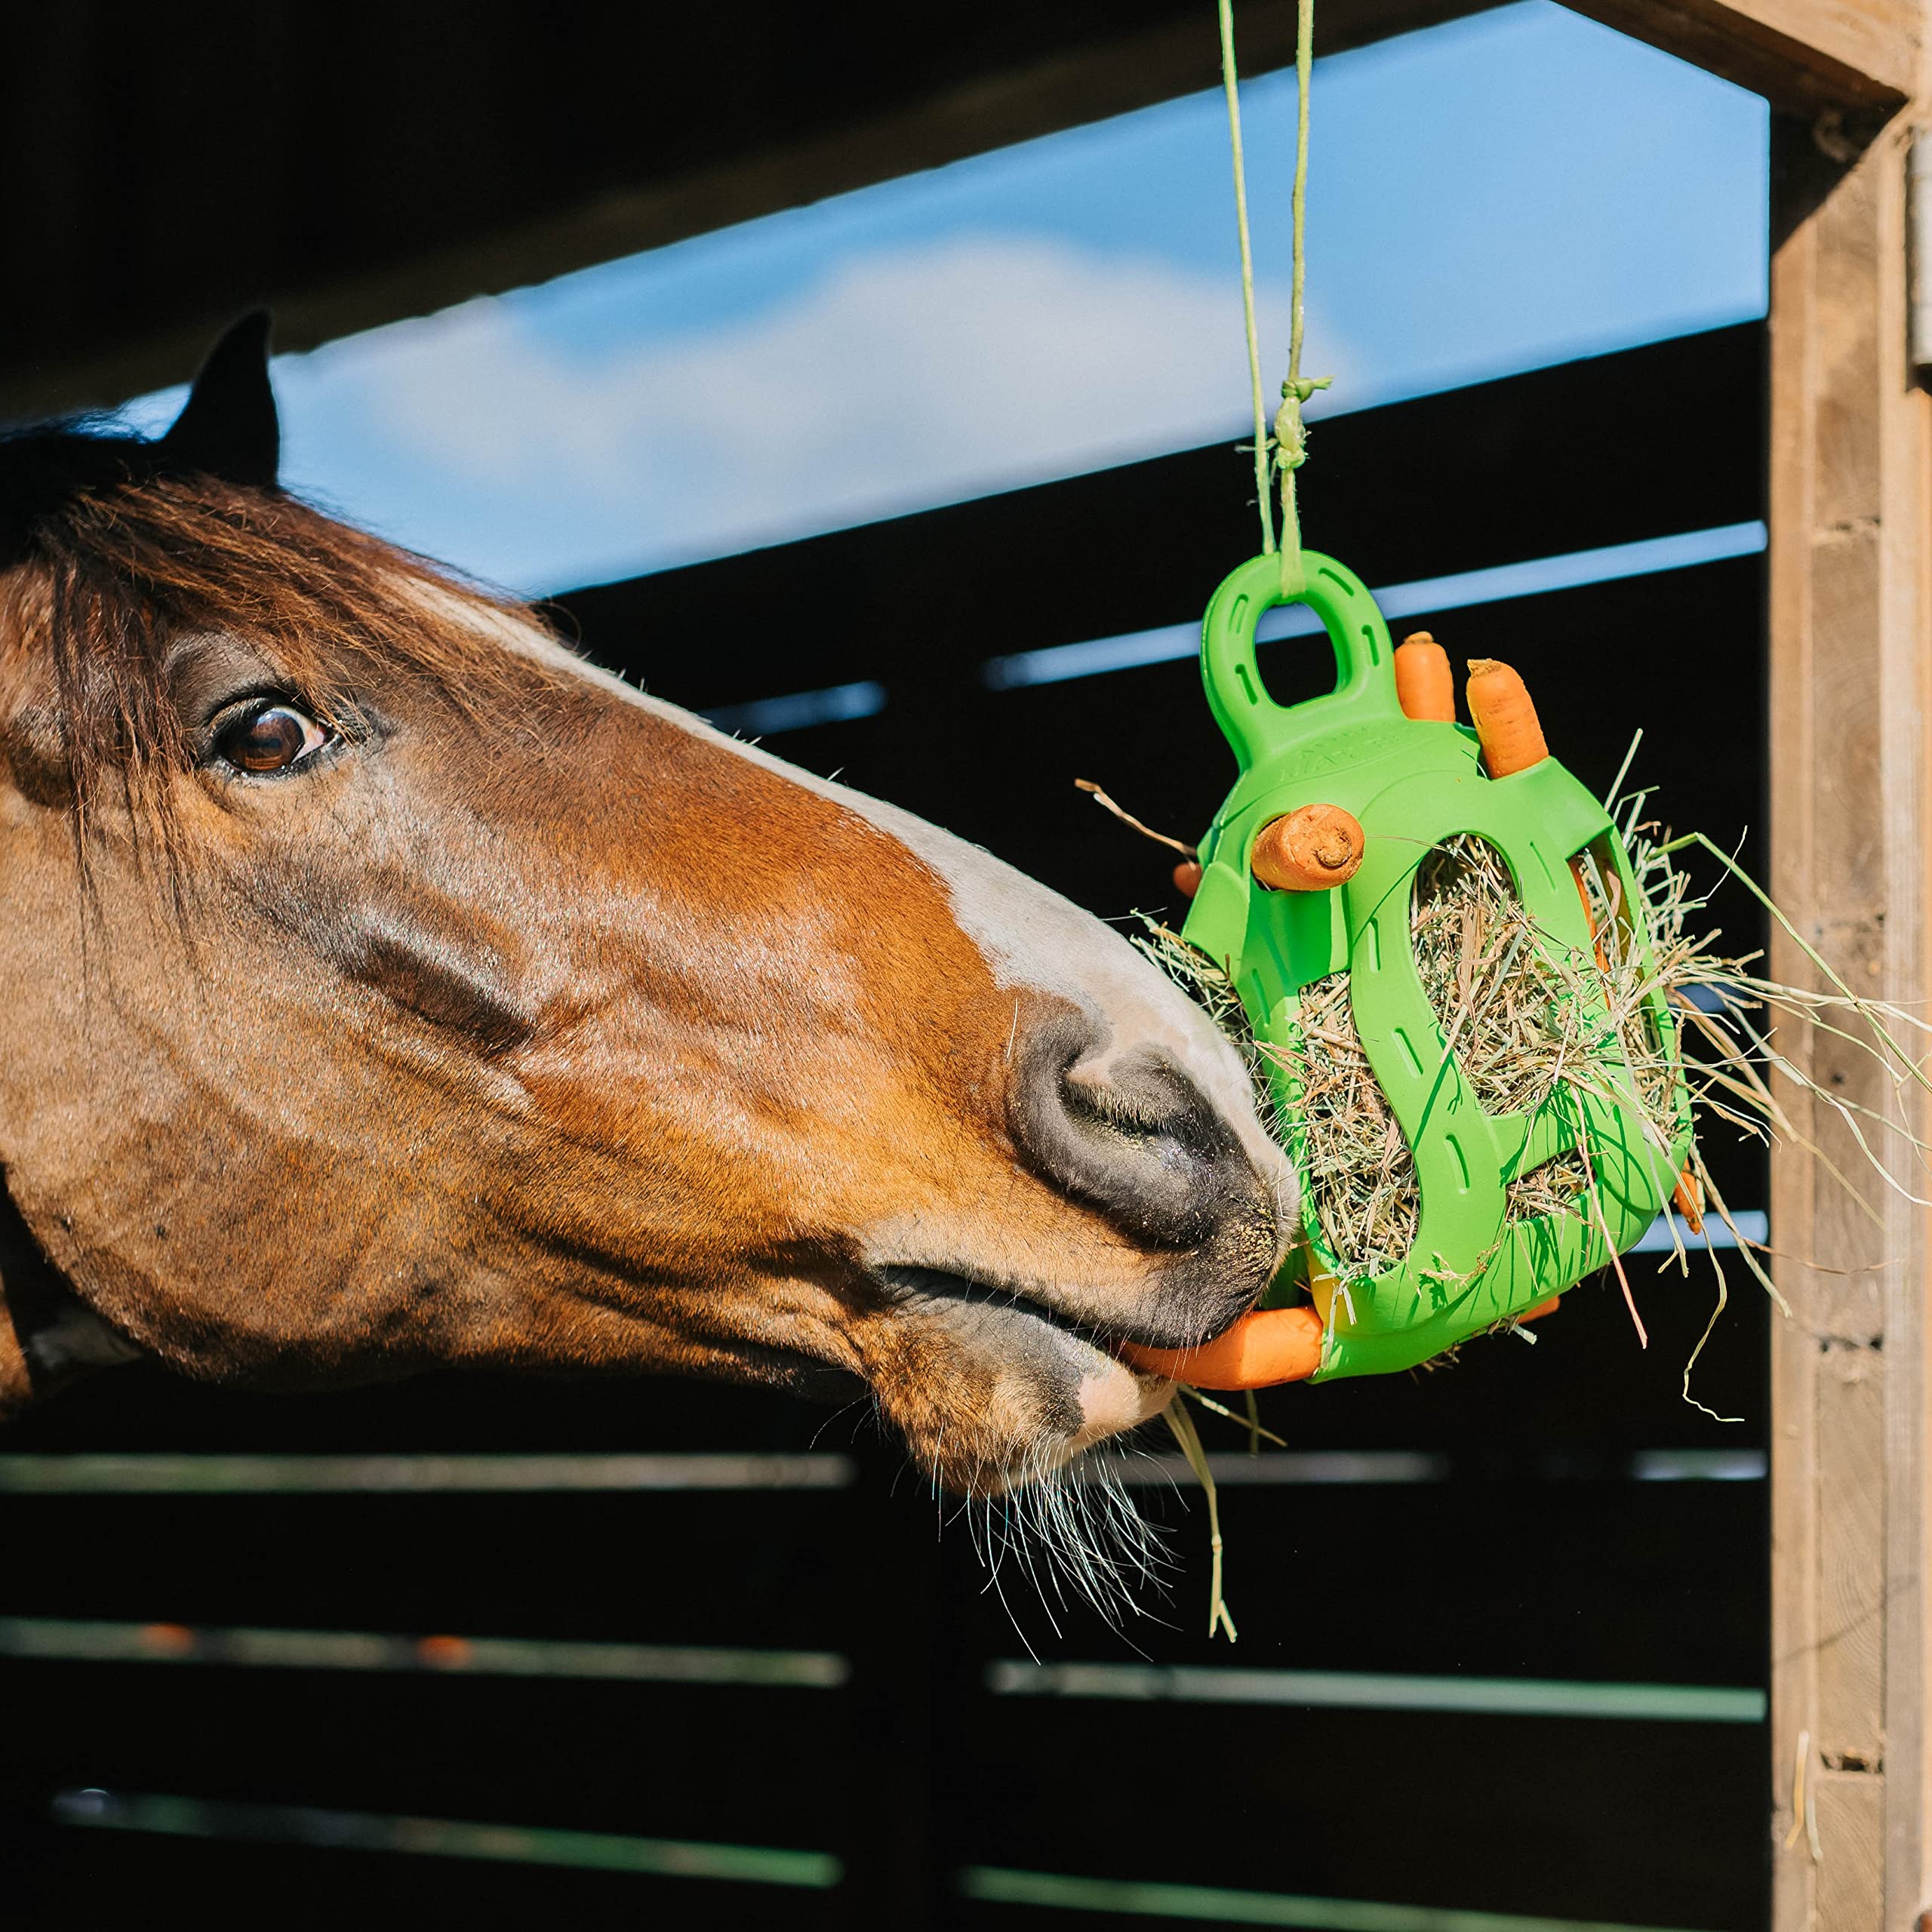 Horsemen's Pride Jolly Hay Ball Stall Toy for Horses, Green